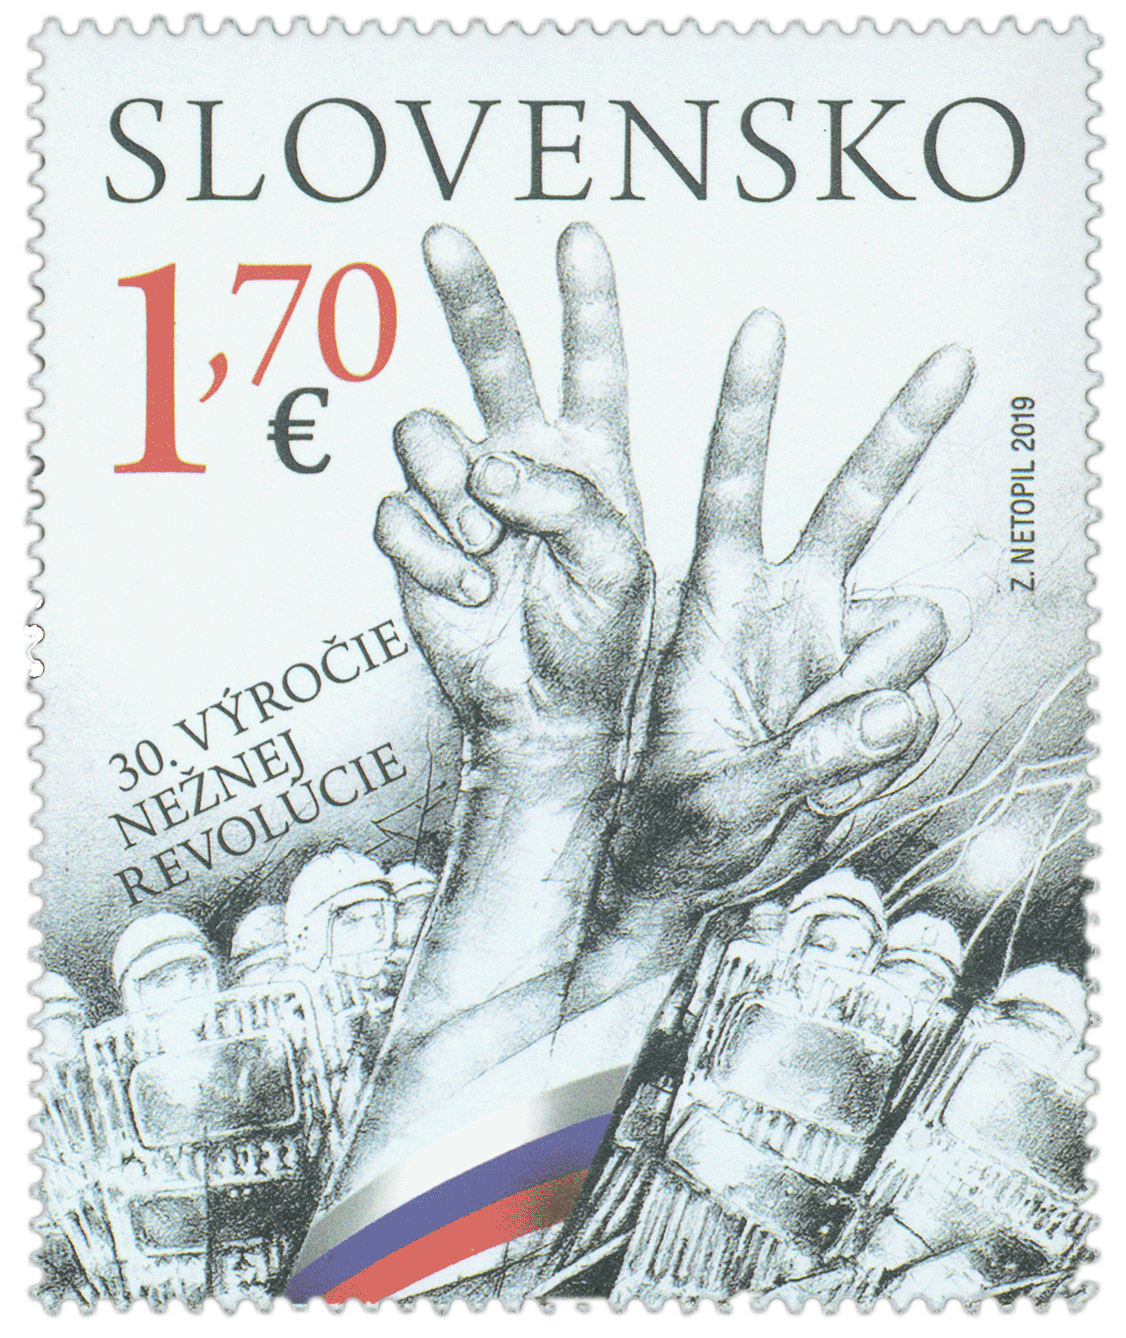 702 - Joint Issue with Czech Republic: 30<sup>th</sup> Anniversary of Velvet Revolution